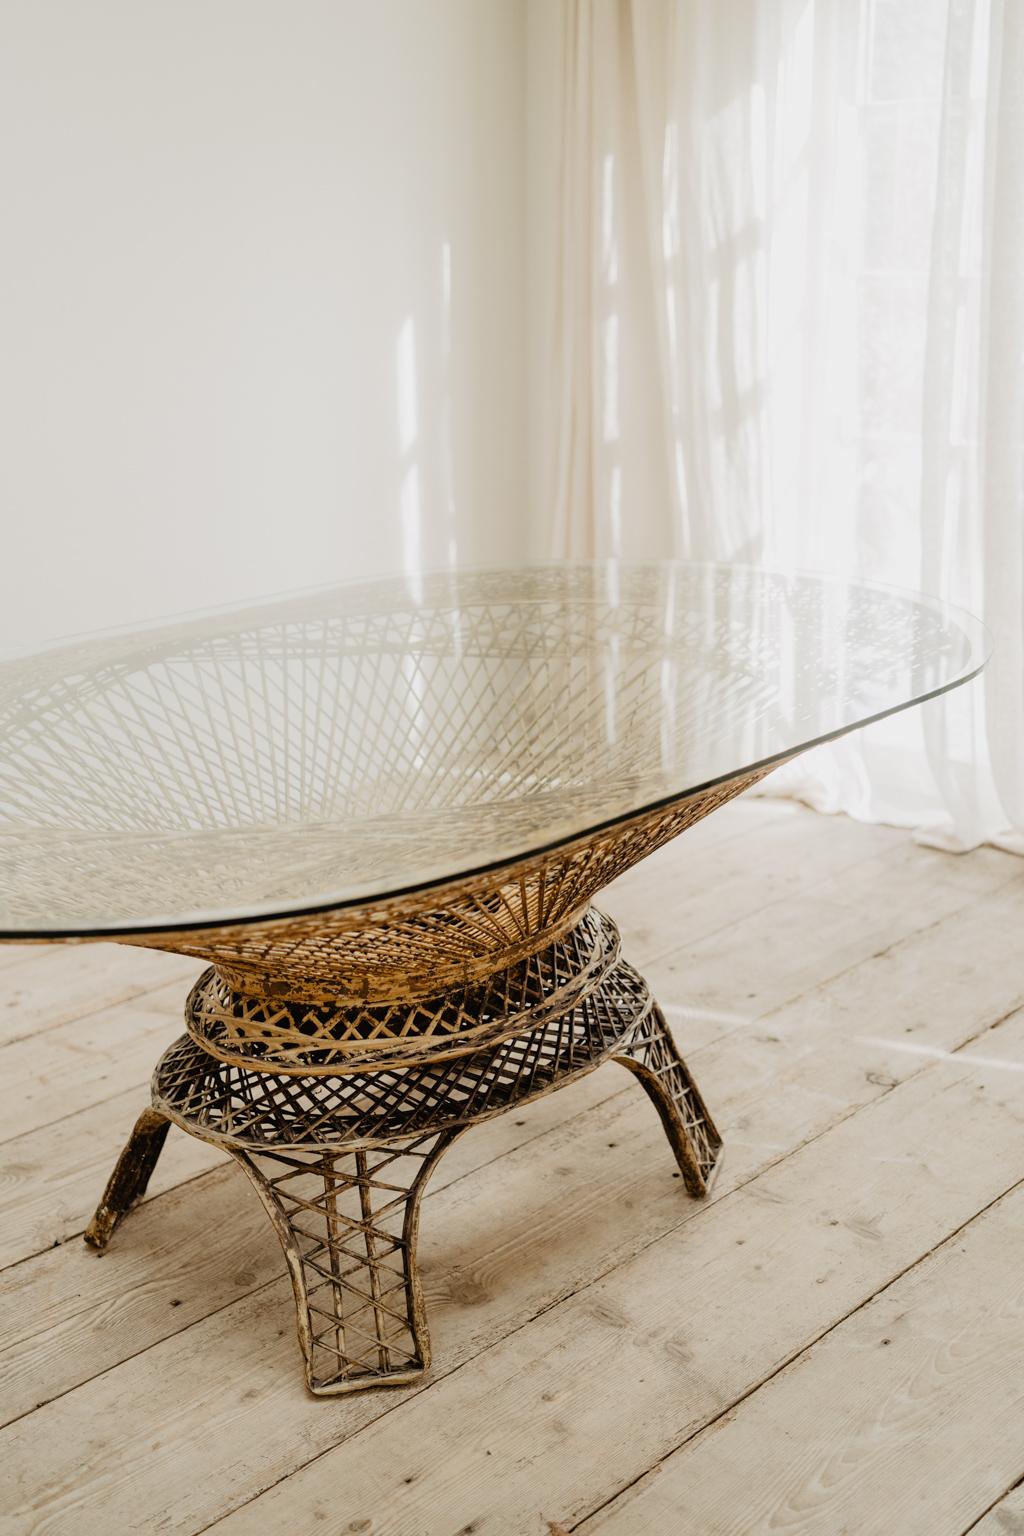 A one of a kind, this iron table, with glass tabletop, great indoors as well as outdoors,
quirky, sturdy, unusual.